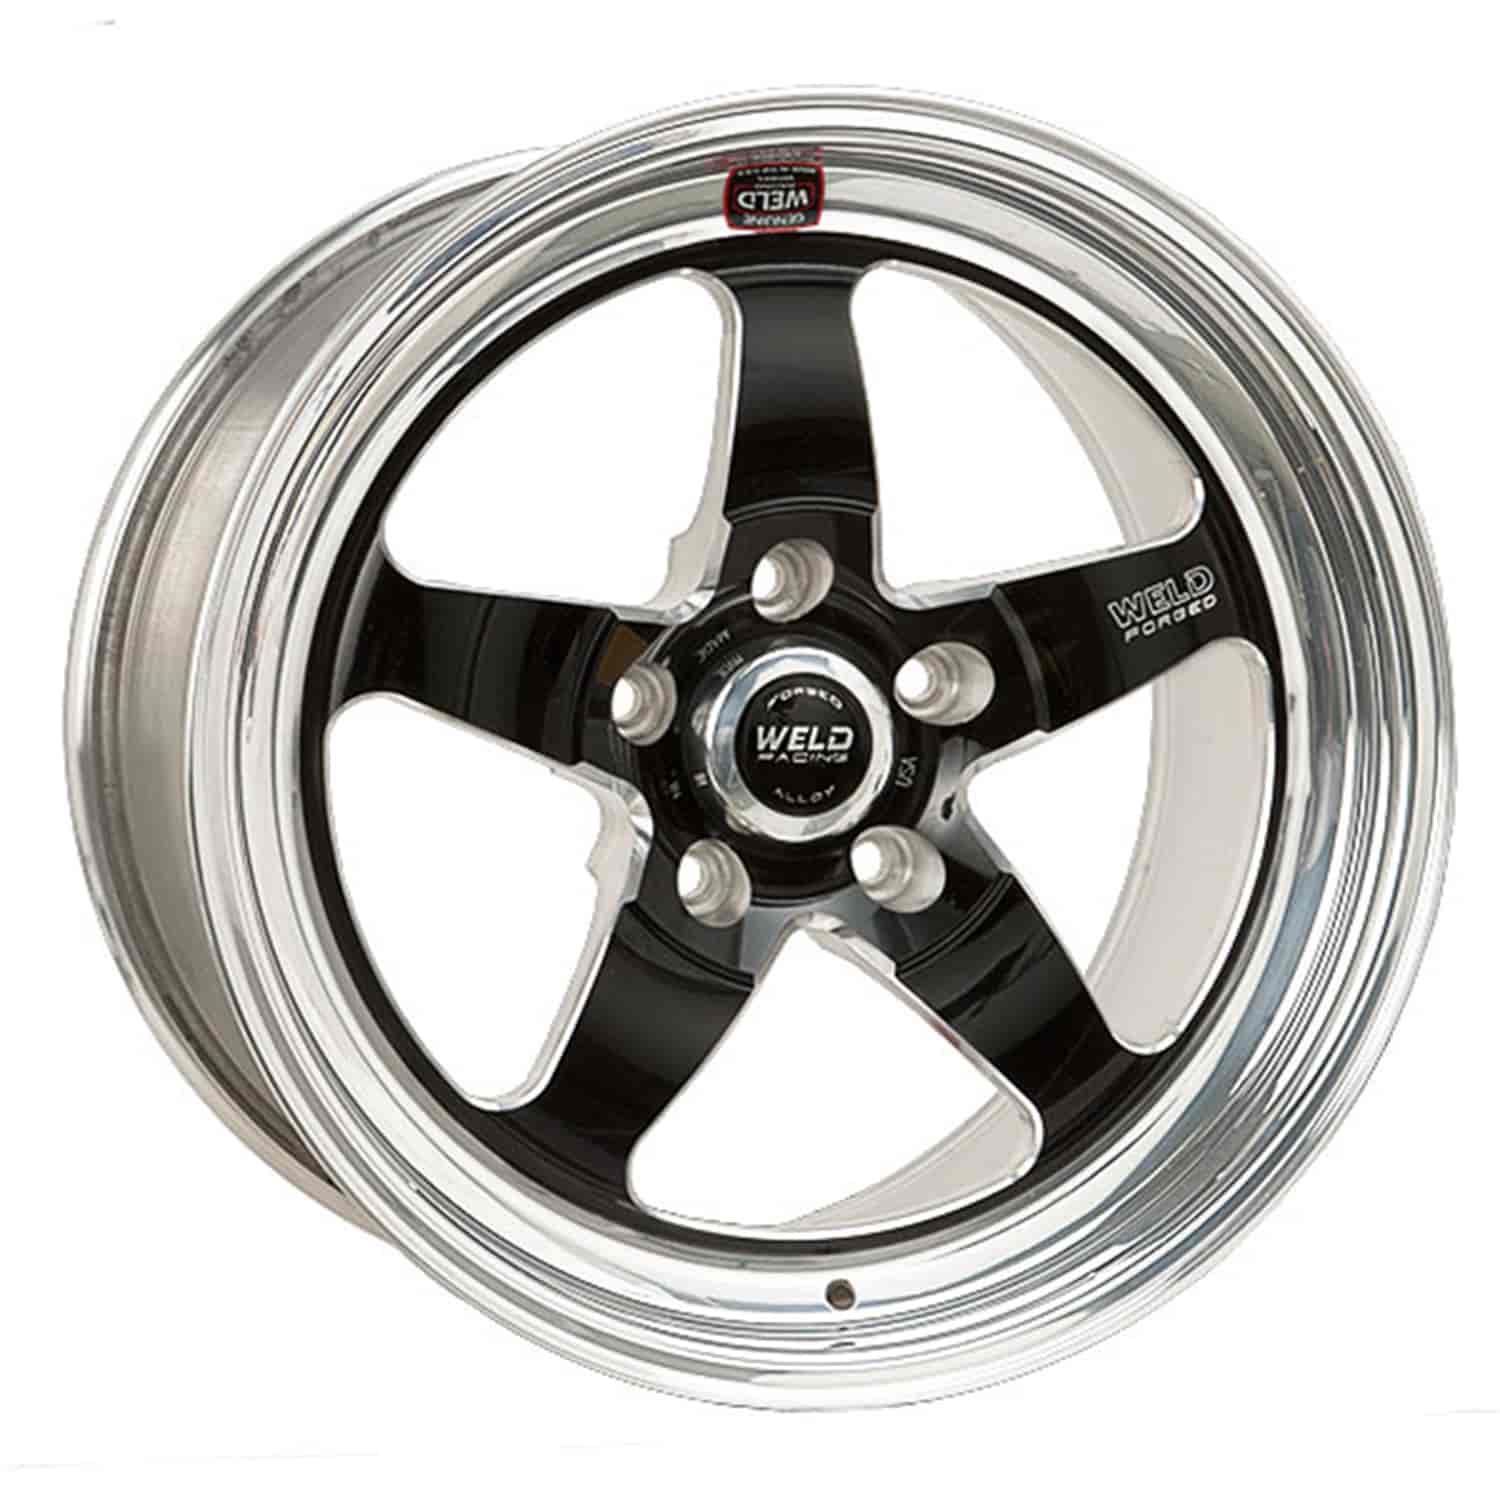 RT-S Series Wheel Size: 15" x 8" Bolt Circle: 5 x 4-1/2" Back Space: 4-1/2"